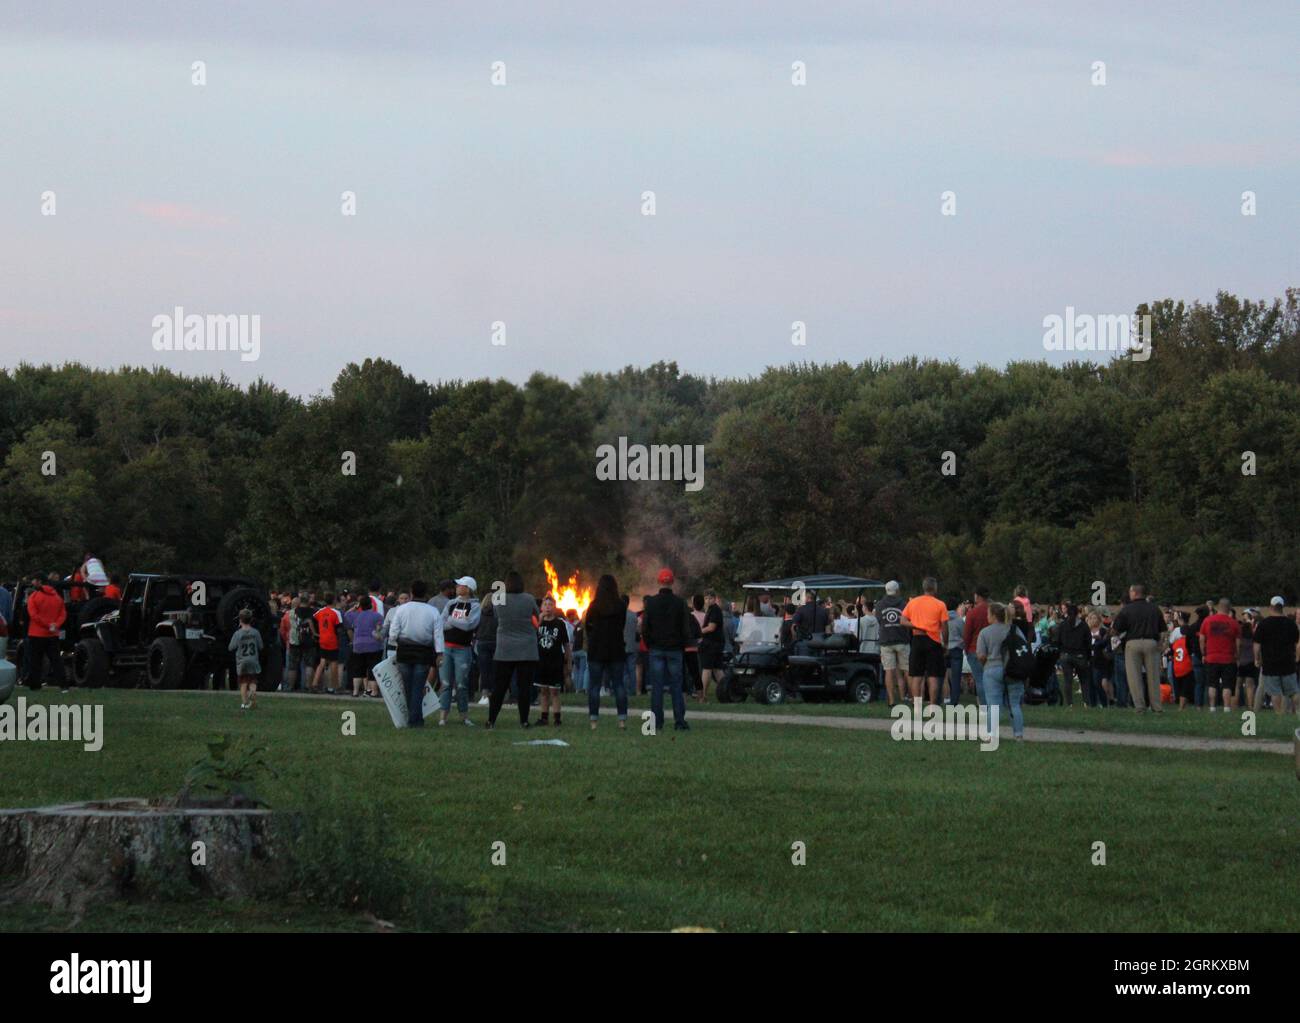 Unmasked people crowded at a bonfire for homecoming 2021 in a rural town in Ohio. Stock Photo